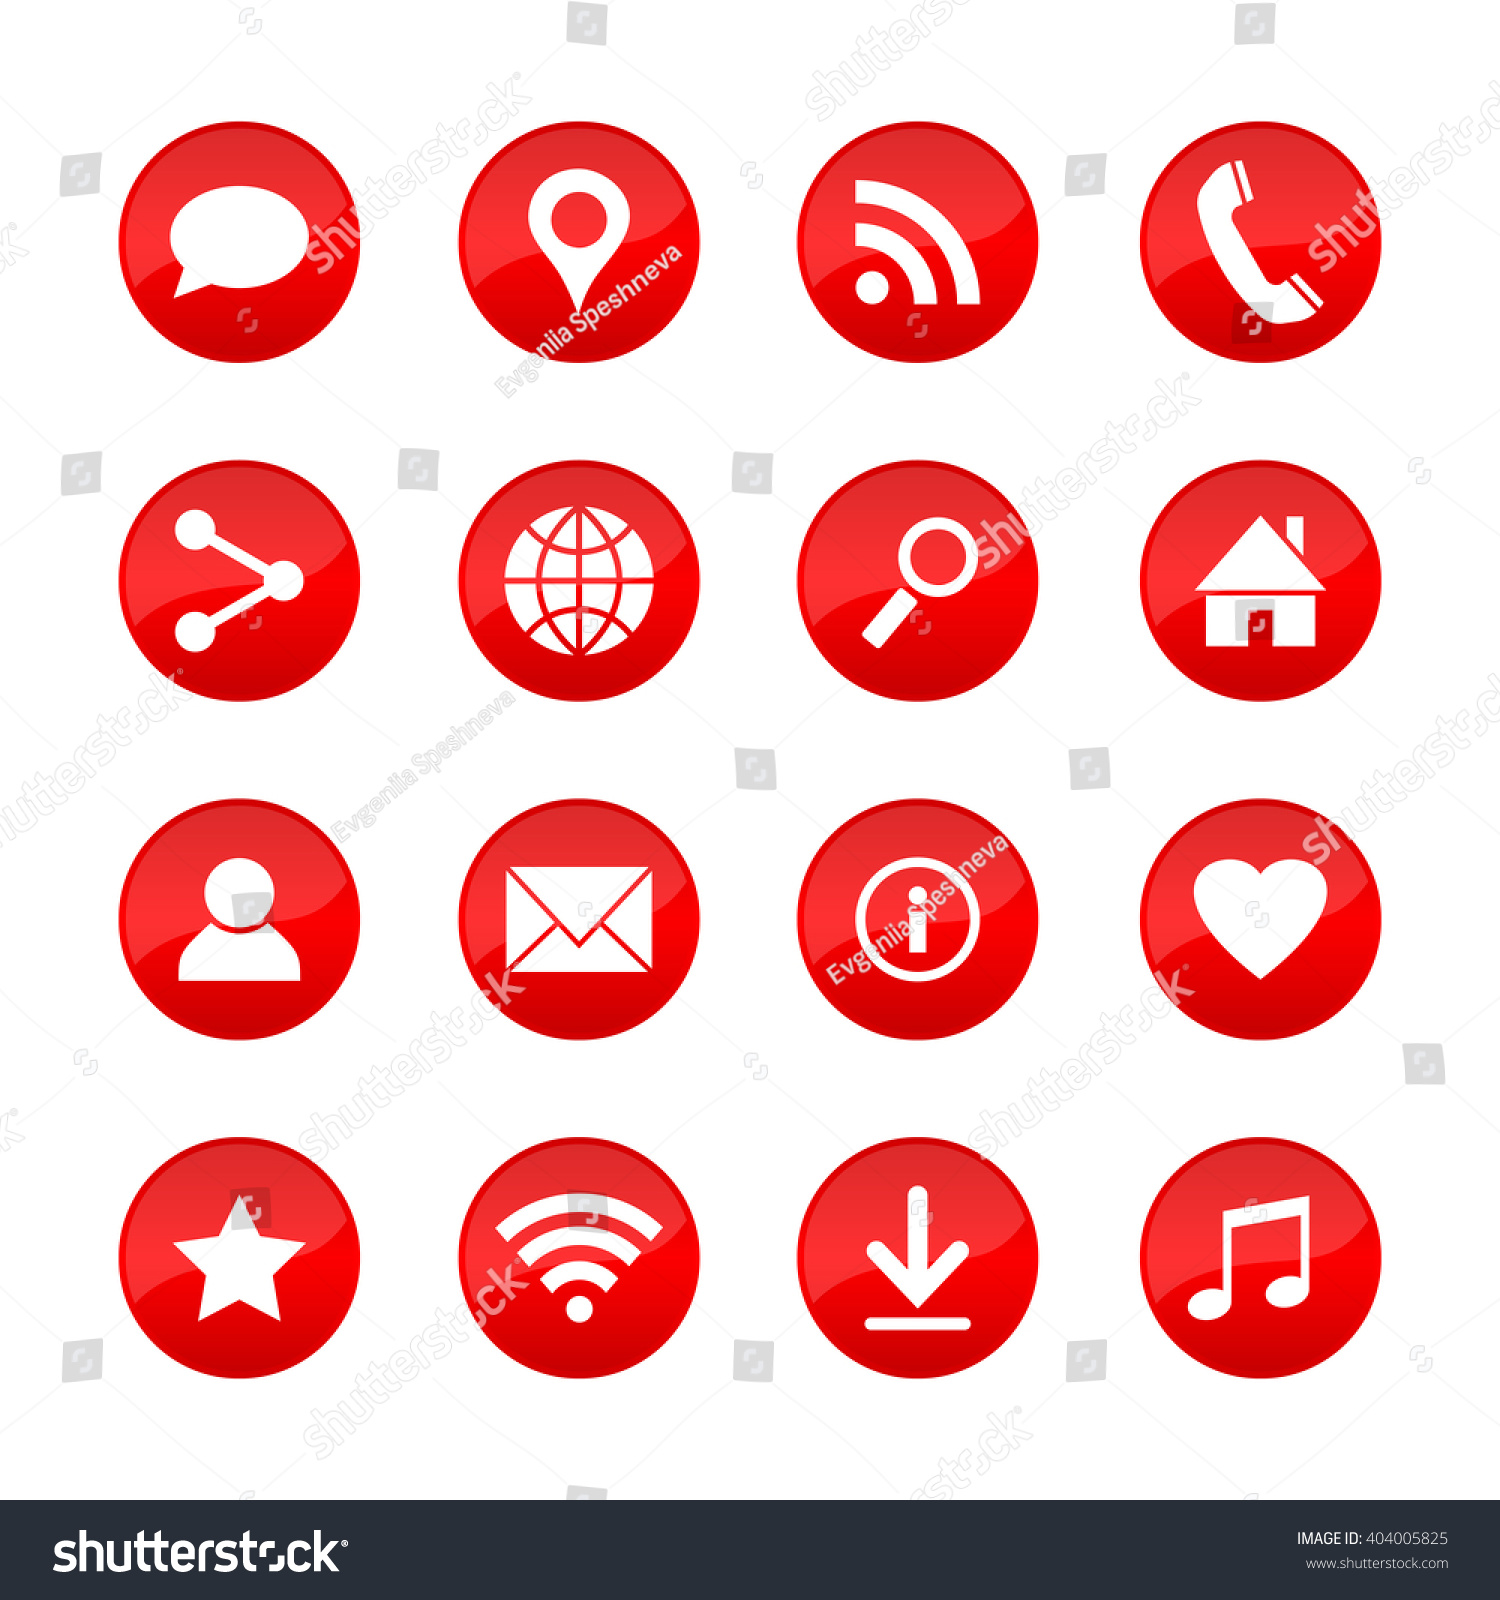 Set of universal web icons for media, communication, business, mobile and  meteorology. Collection of different elements on red circle buttons. Vector illustration. #404005825